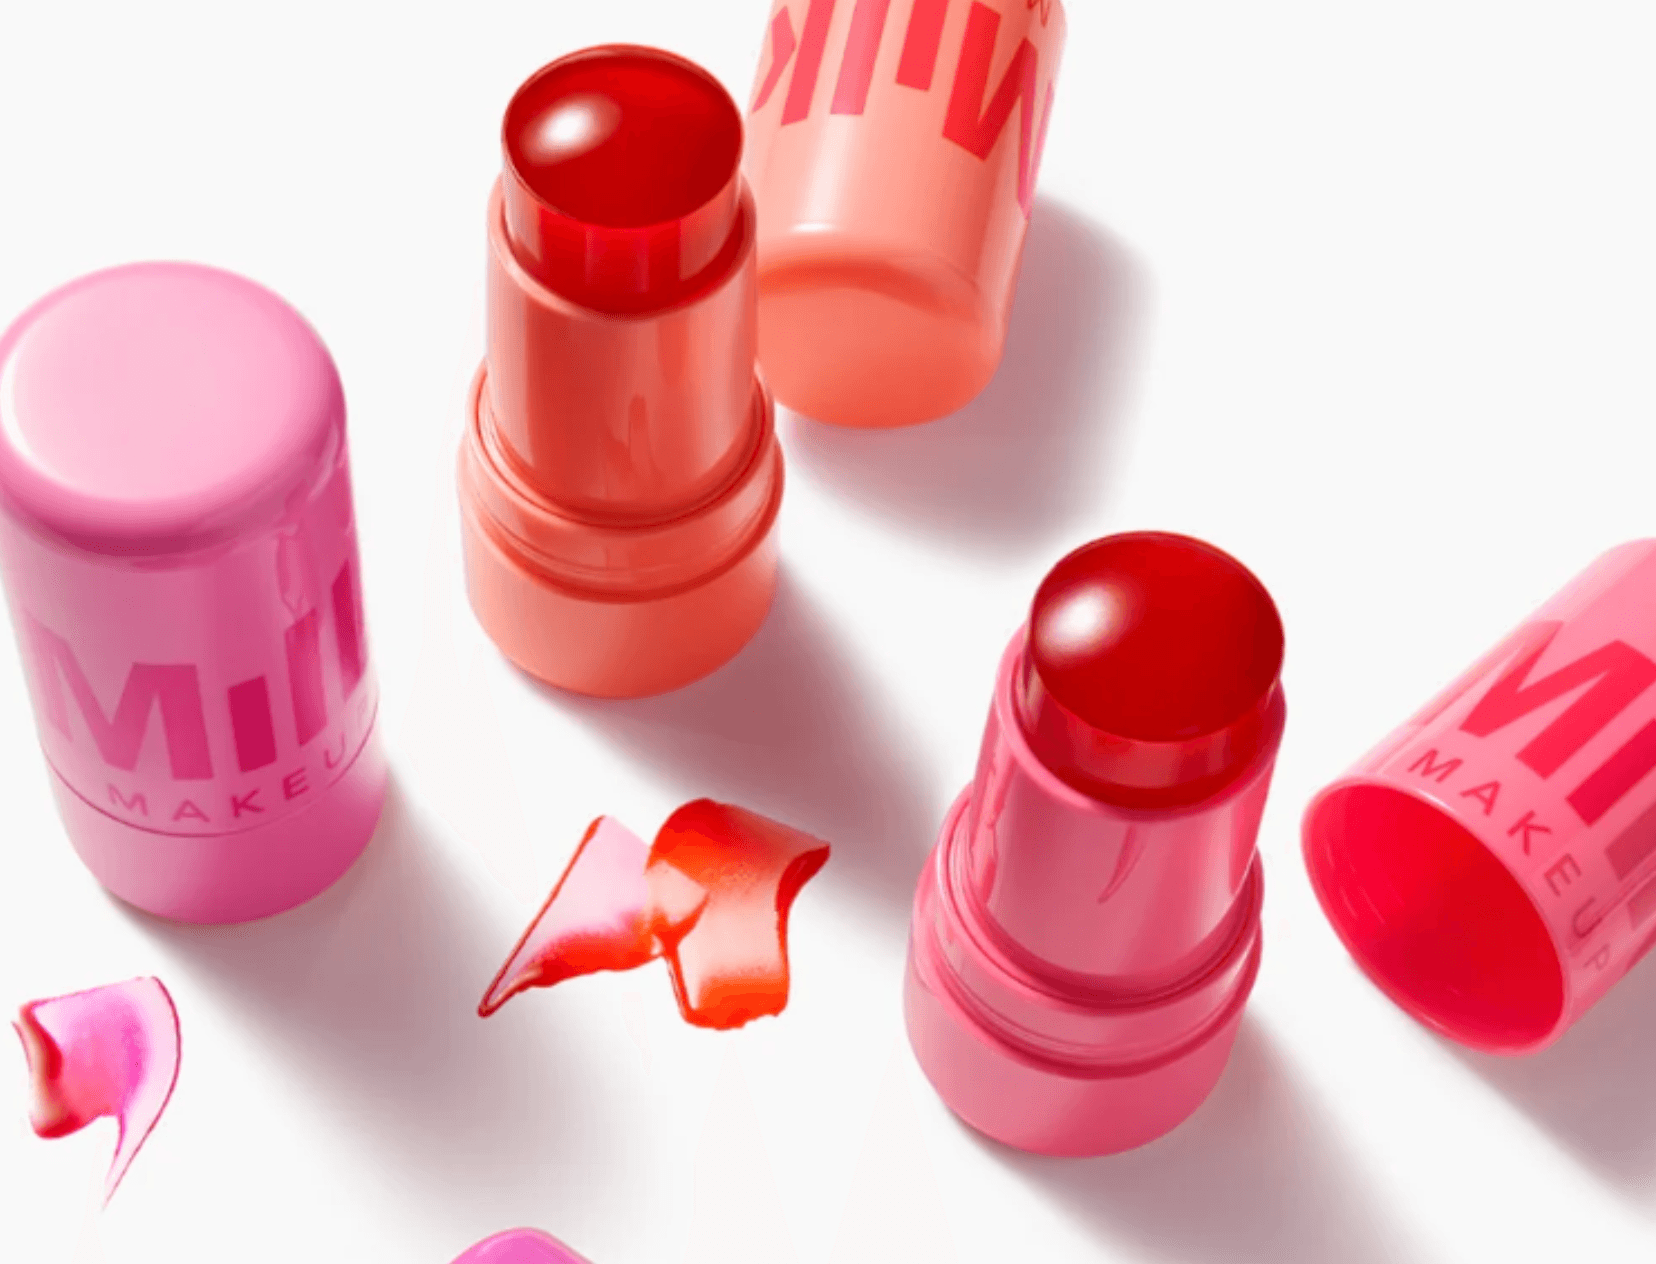 Editor’s Review: Does The Milk Makeup Cooling Water Jelly Tint Live Up To The Hype?